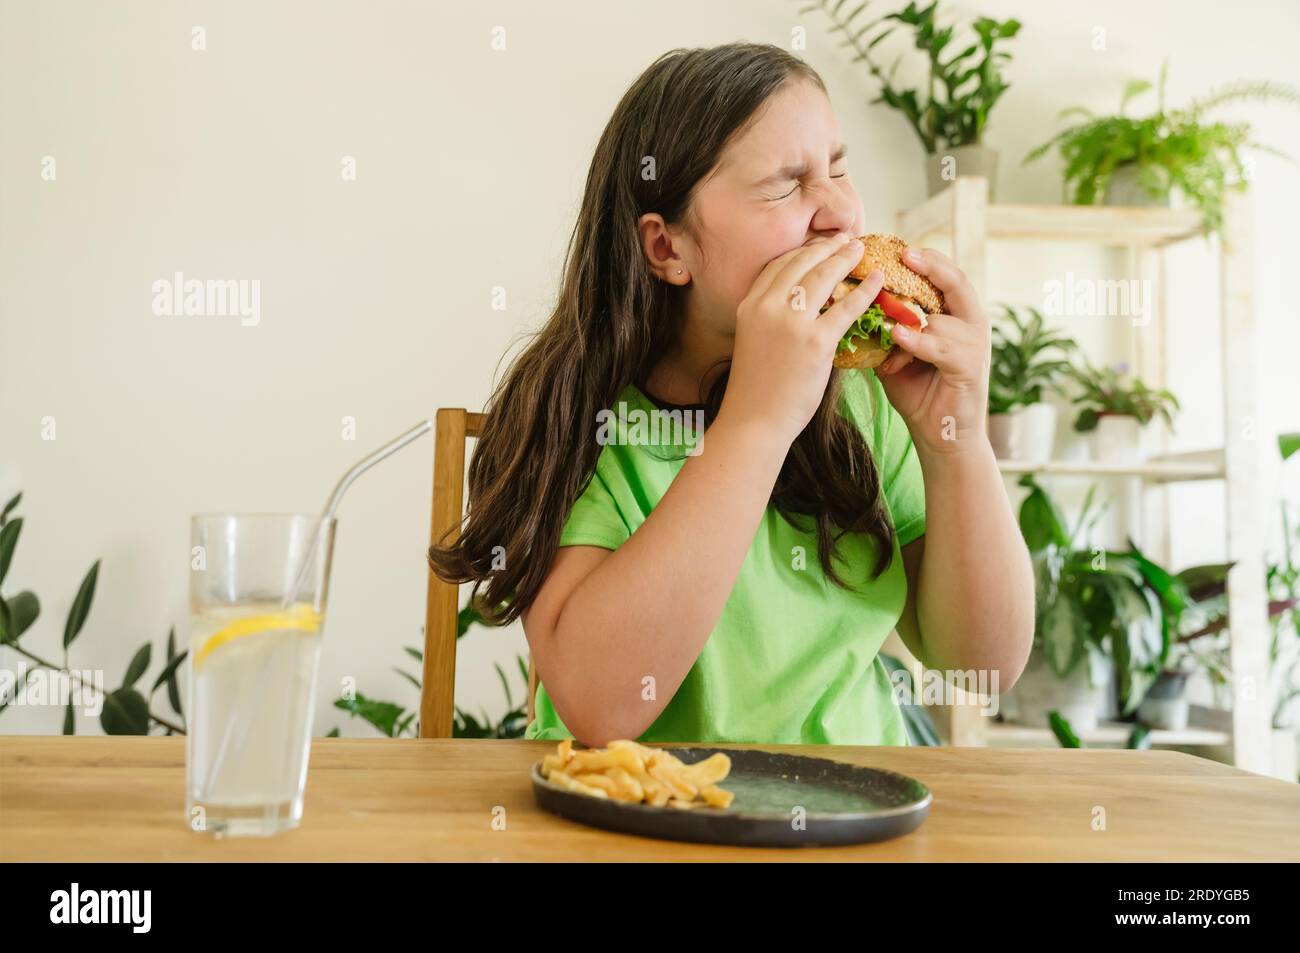 Girl eating hamburger with french fries and soda at home Stock Photo